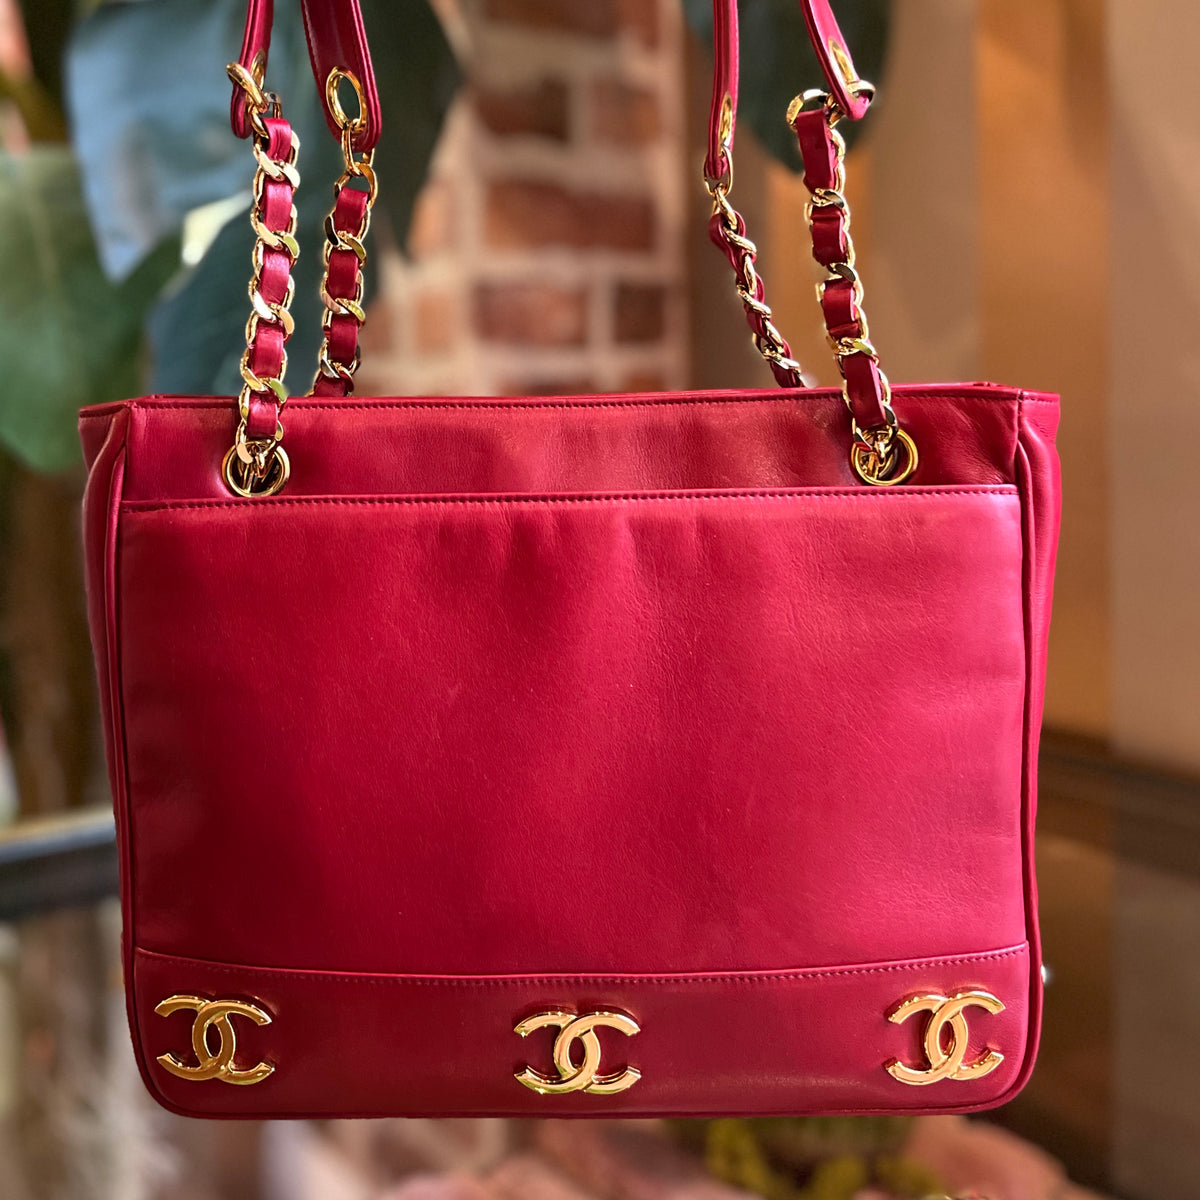 CHANEL Red Lambskin Leather Triple CC Tote Bag